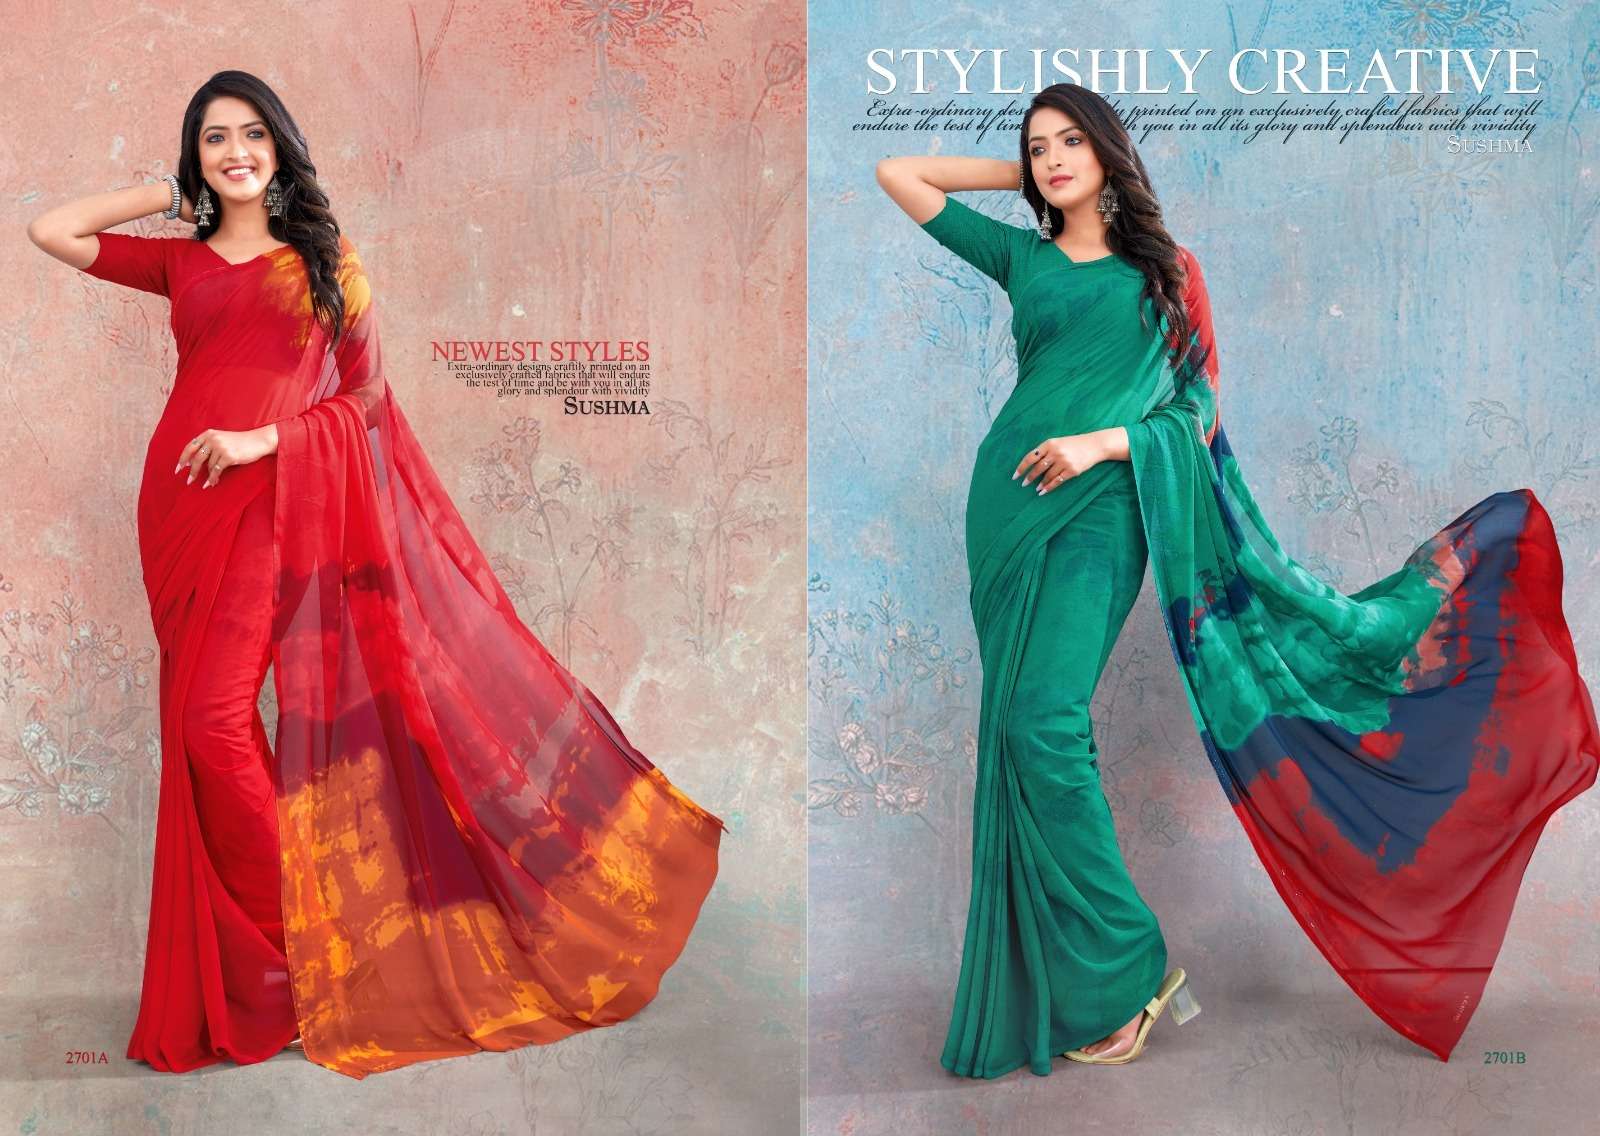 True Imagination By Sushma 2701-A To 2703-B Series Indian Traditional Wear Collection Beautiful Stylish Fancy Colorful Party Wear & Occasional Wear Georgette Sarees At Wholesale Price